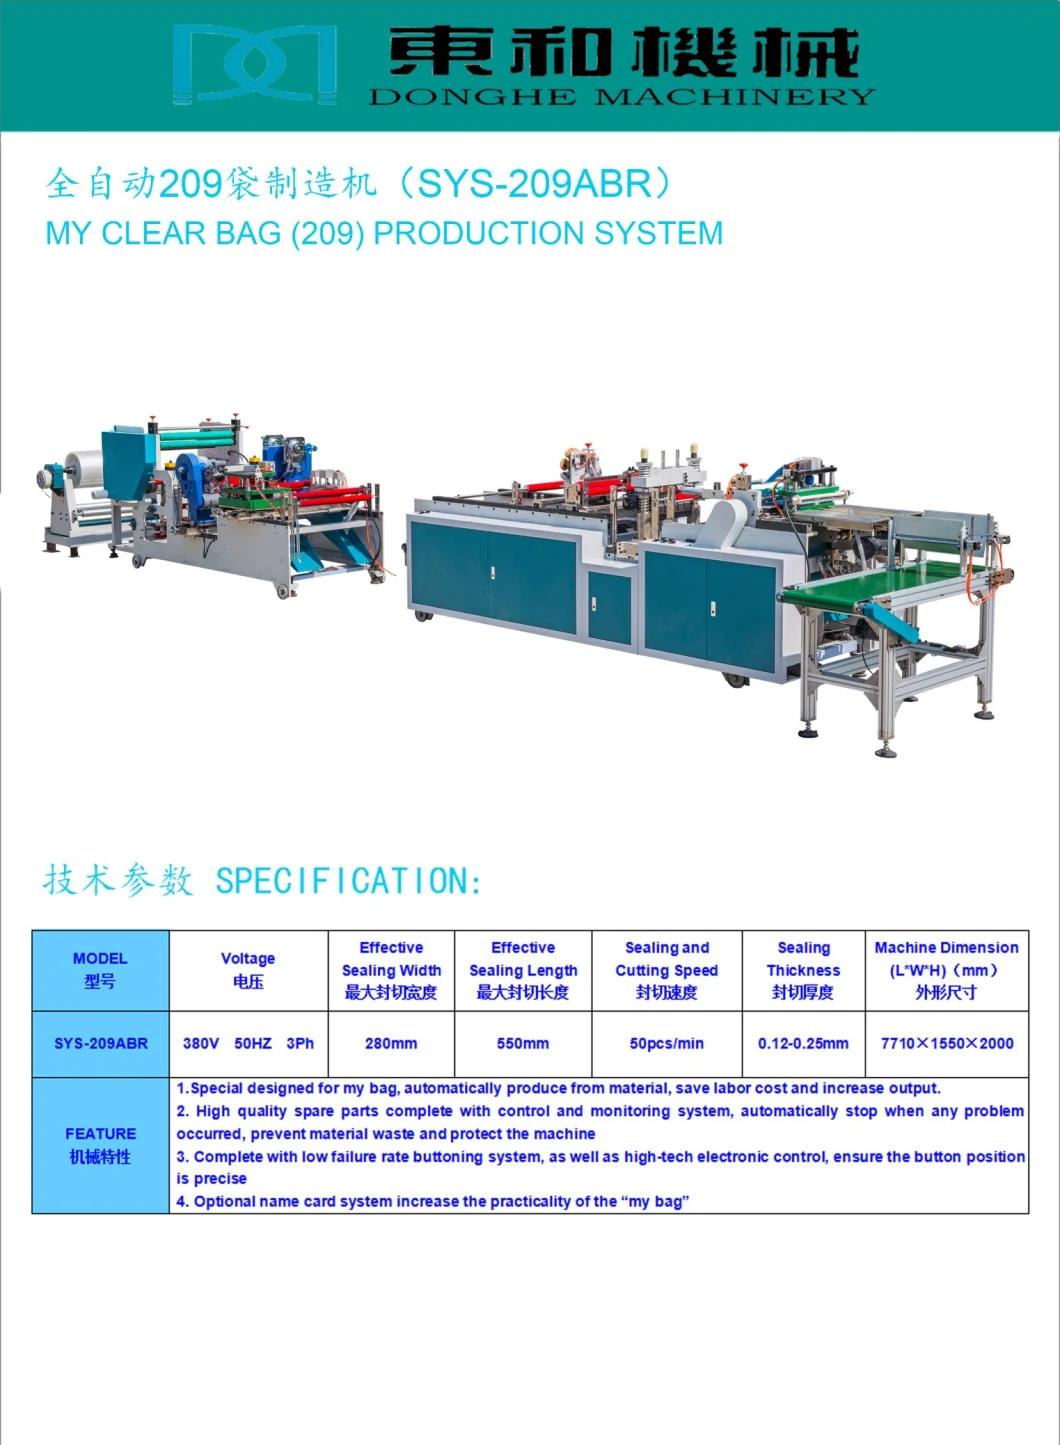 Fully Auto My Clear Bag Production System